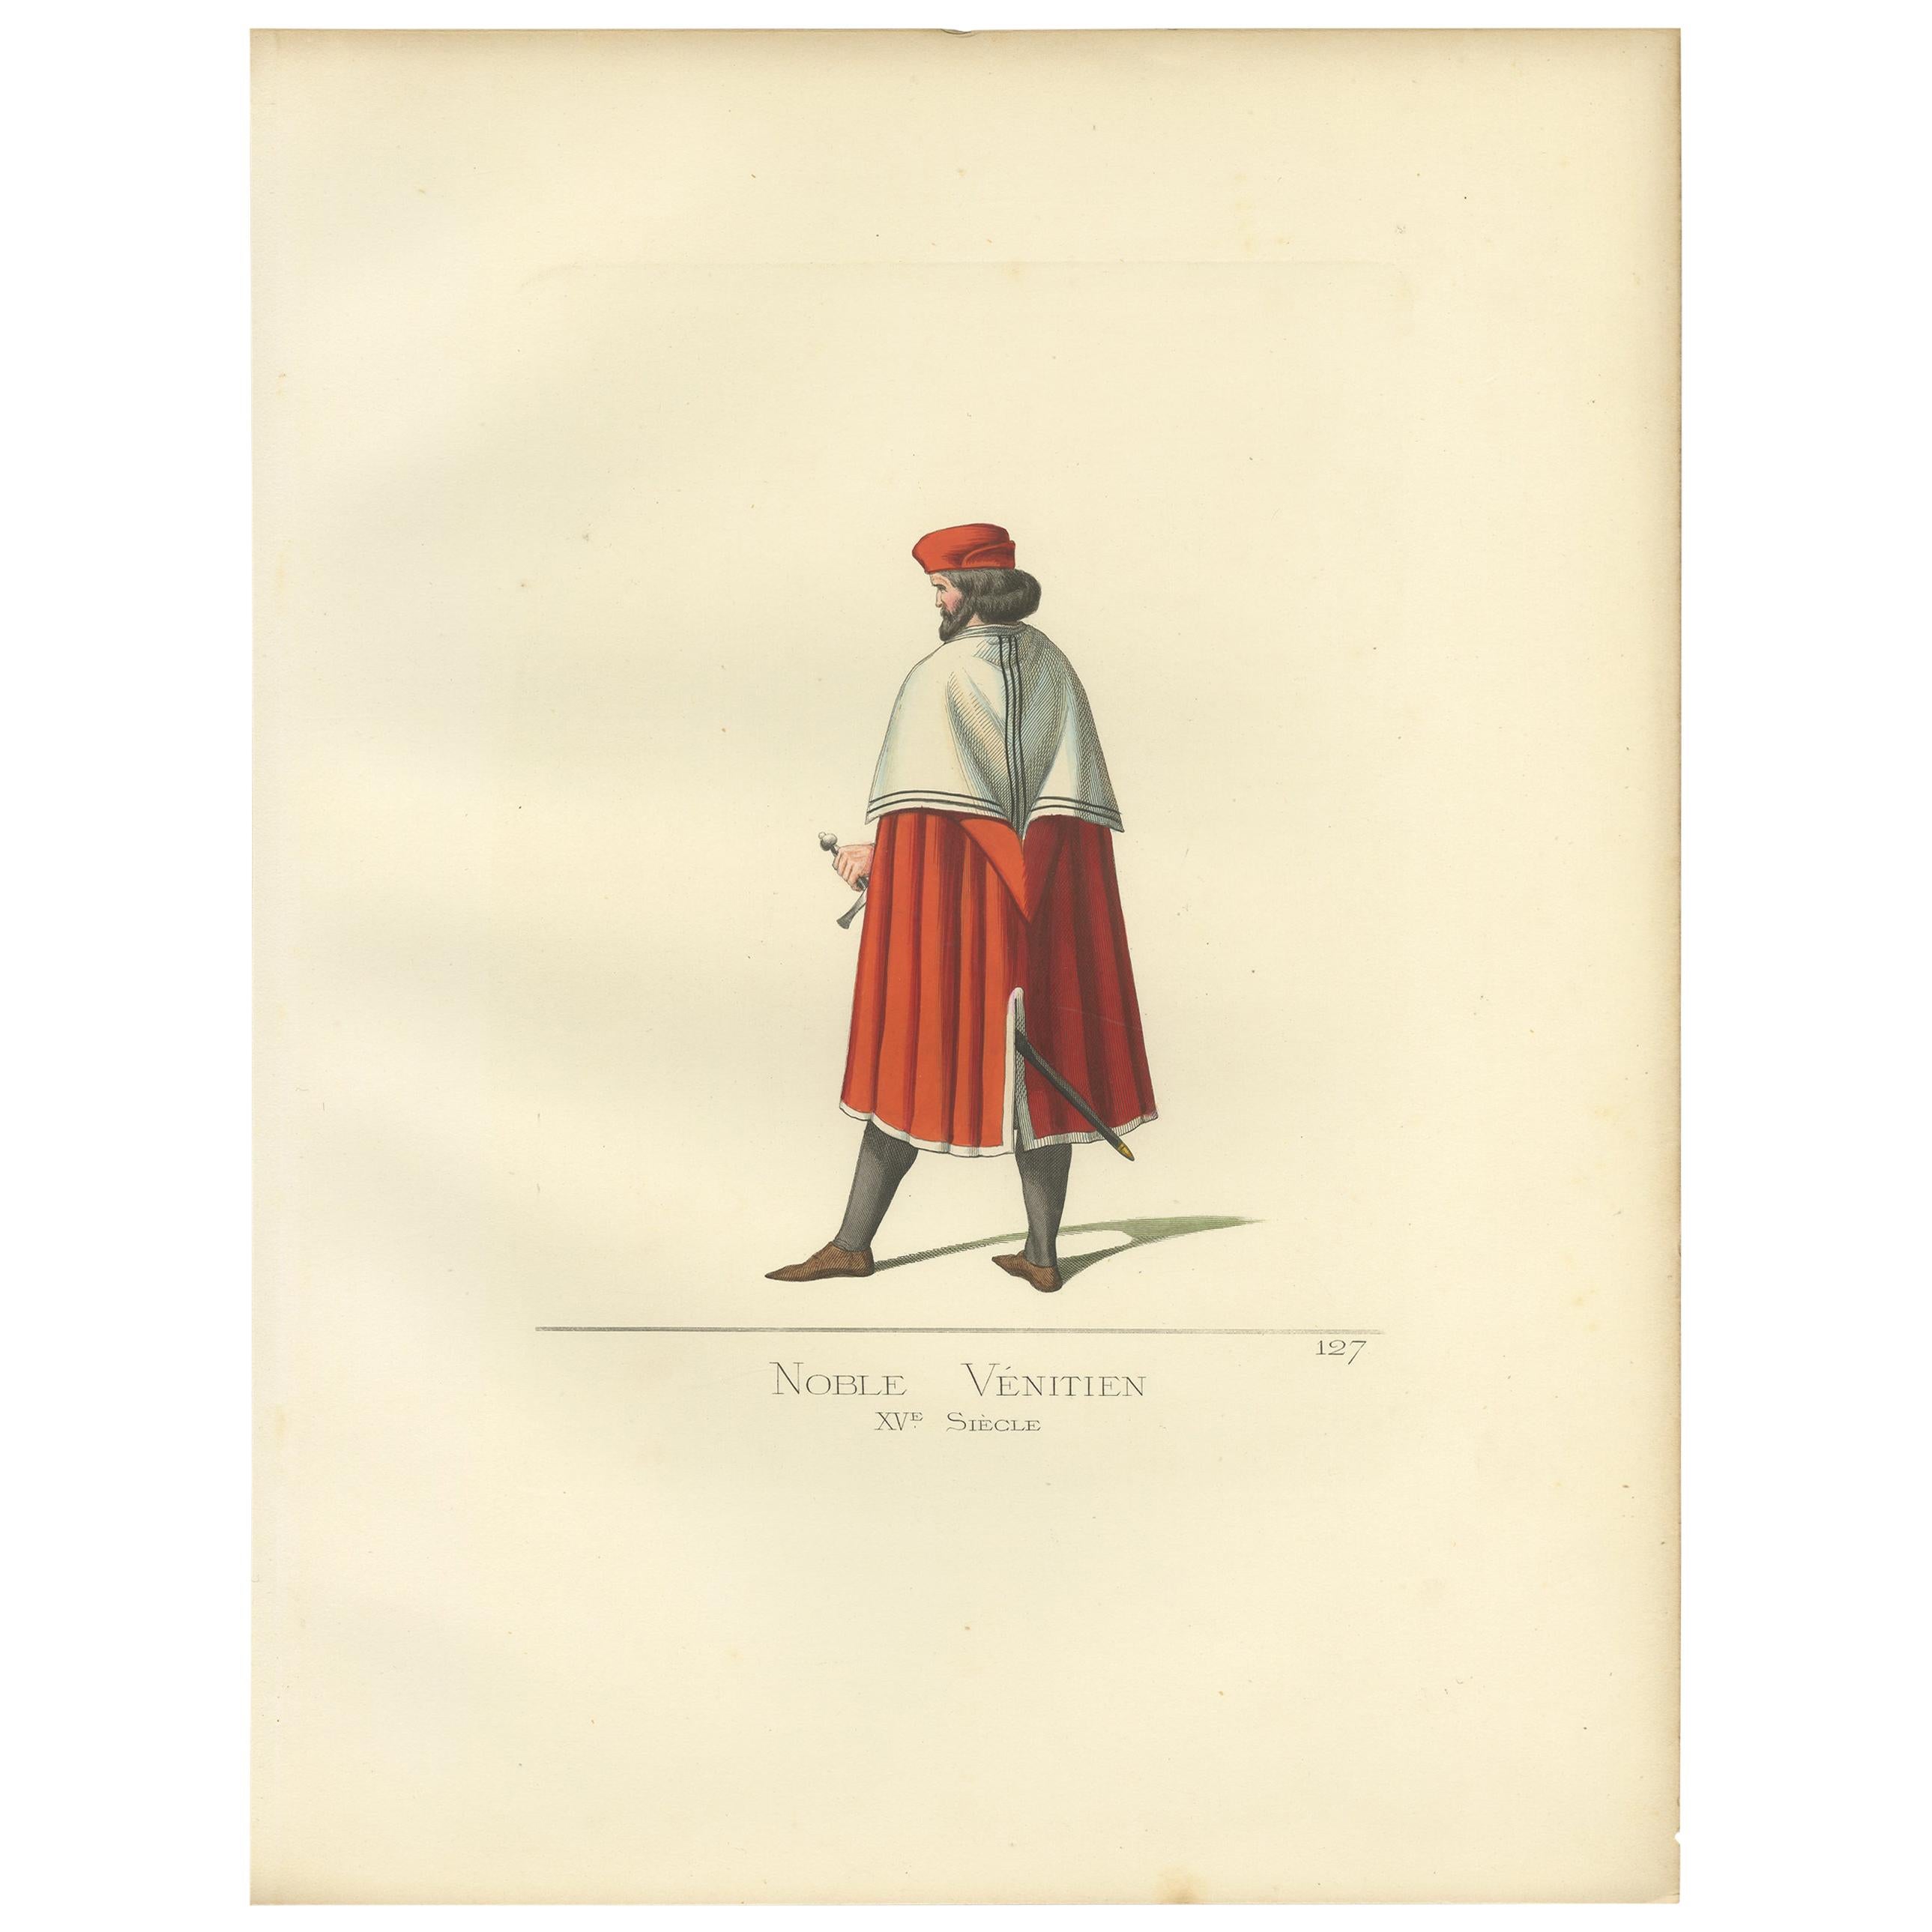 Antique Print of a Venetian Nobleman, Italy, 15th Century, by Bonnard, 1860